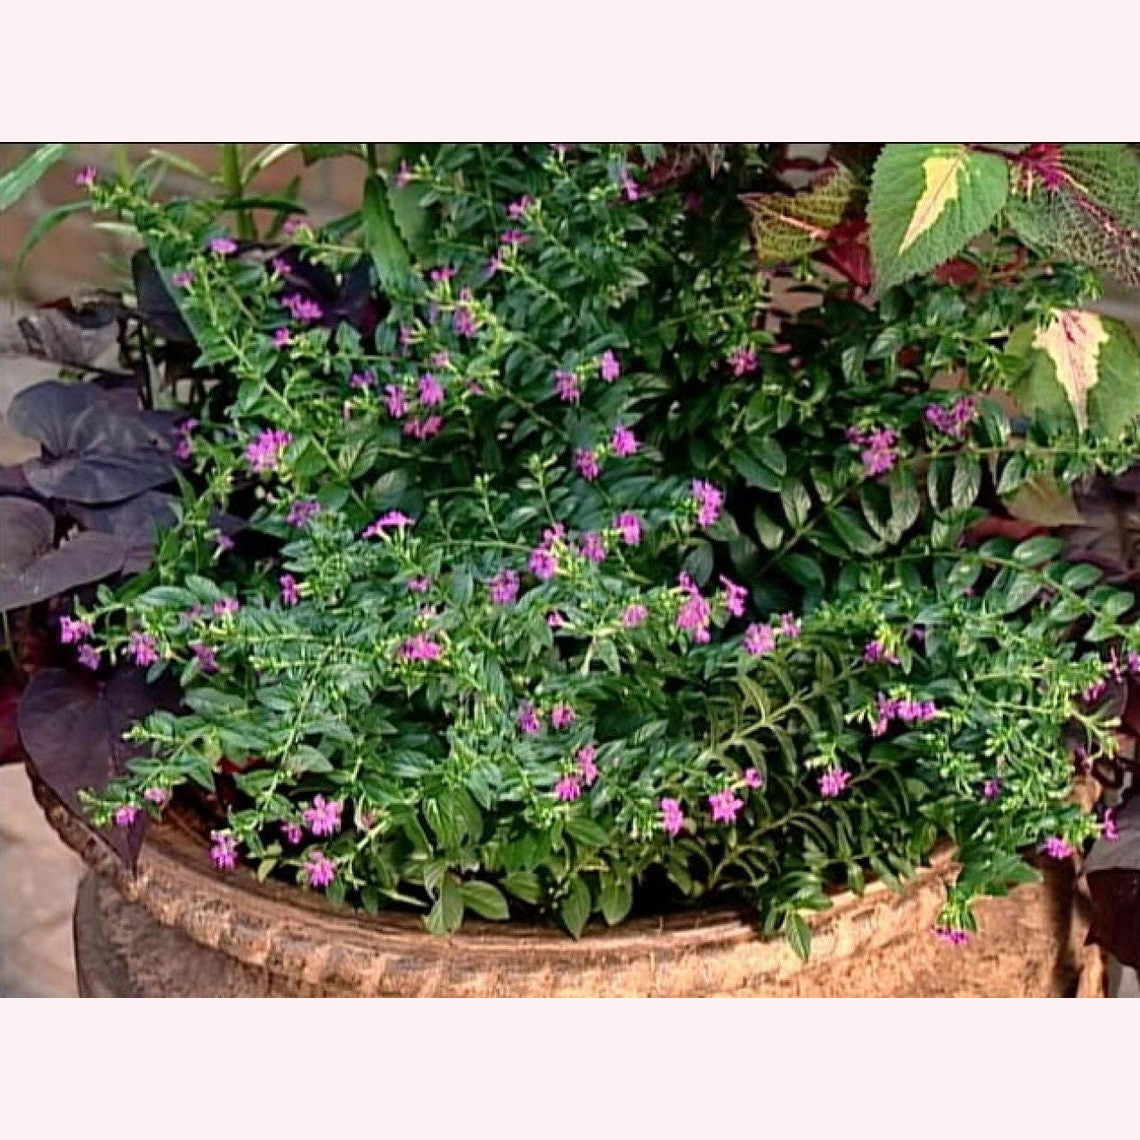 Mexican Heather blooms.